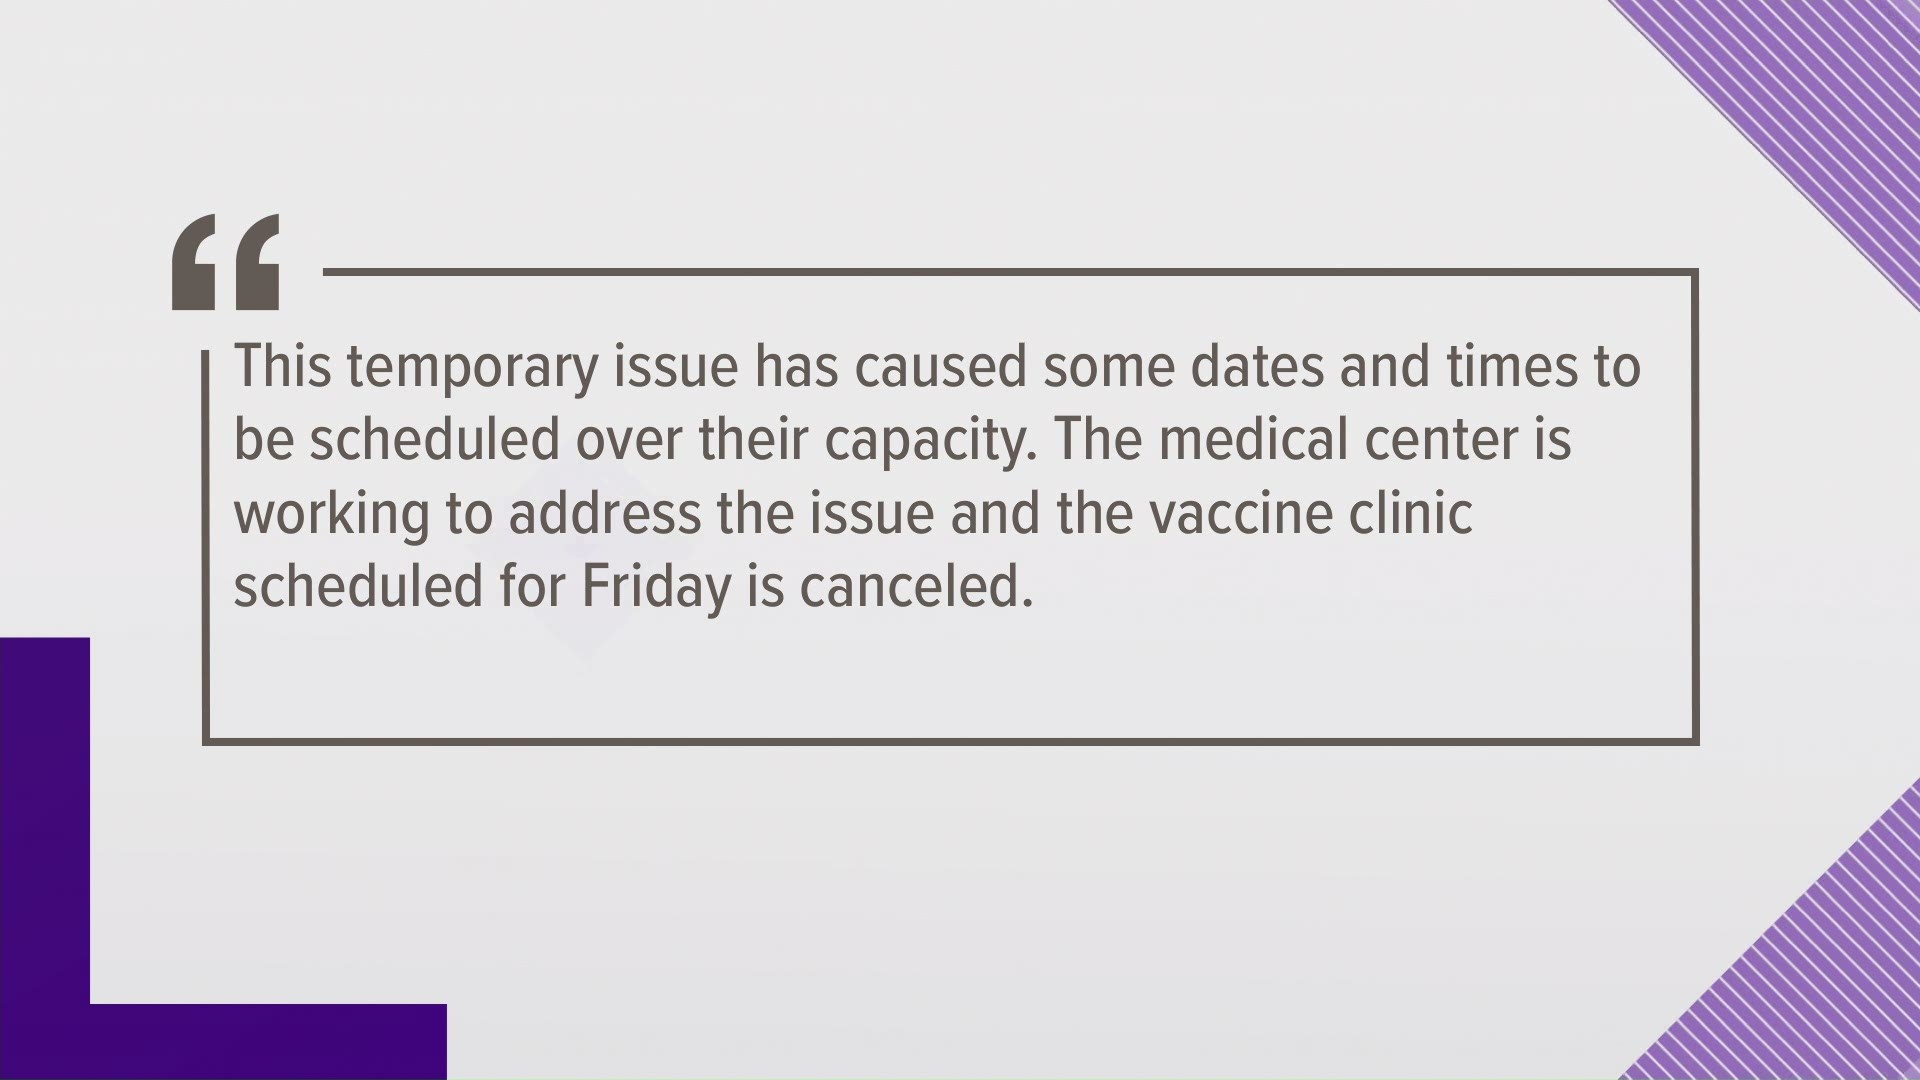 NFMMC issues with scheduling vaccine